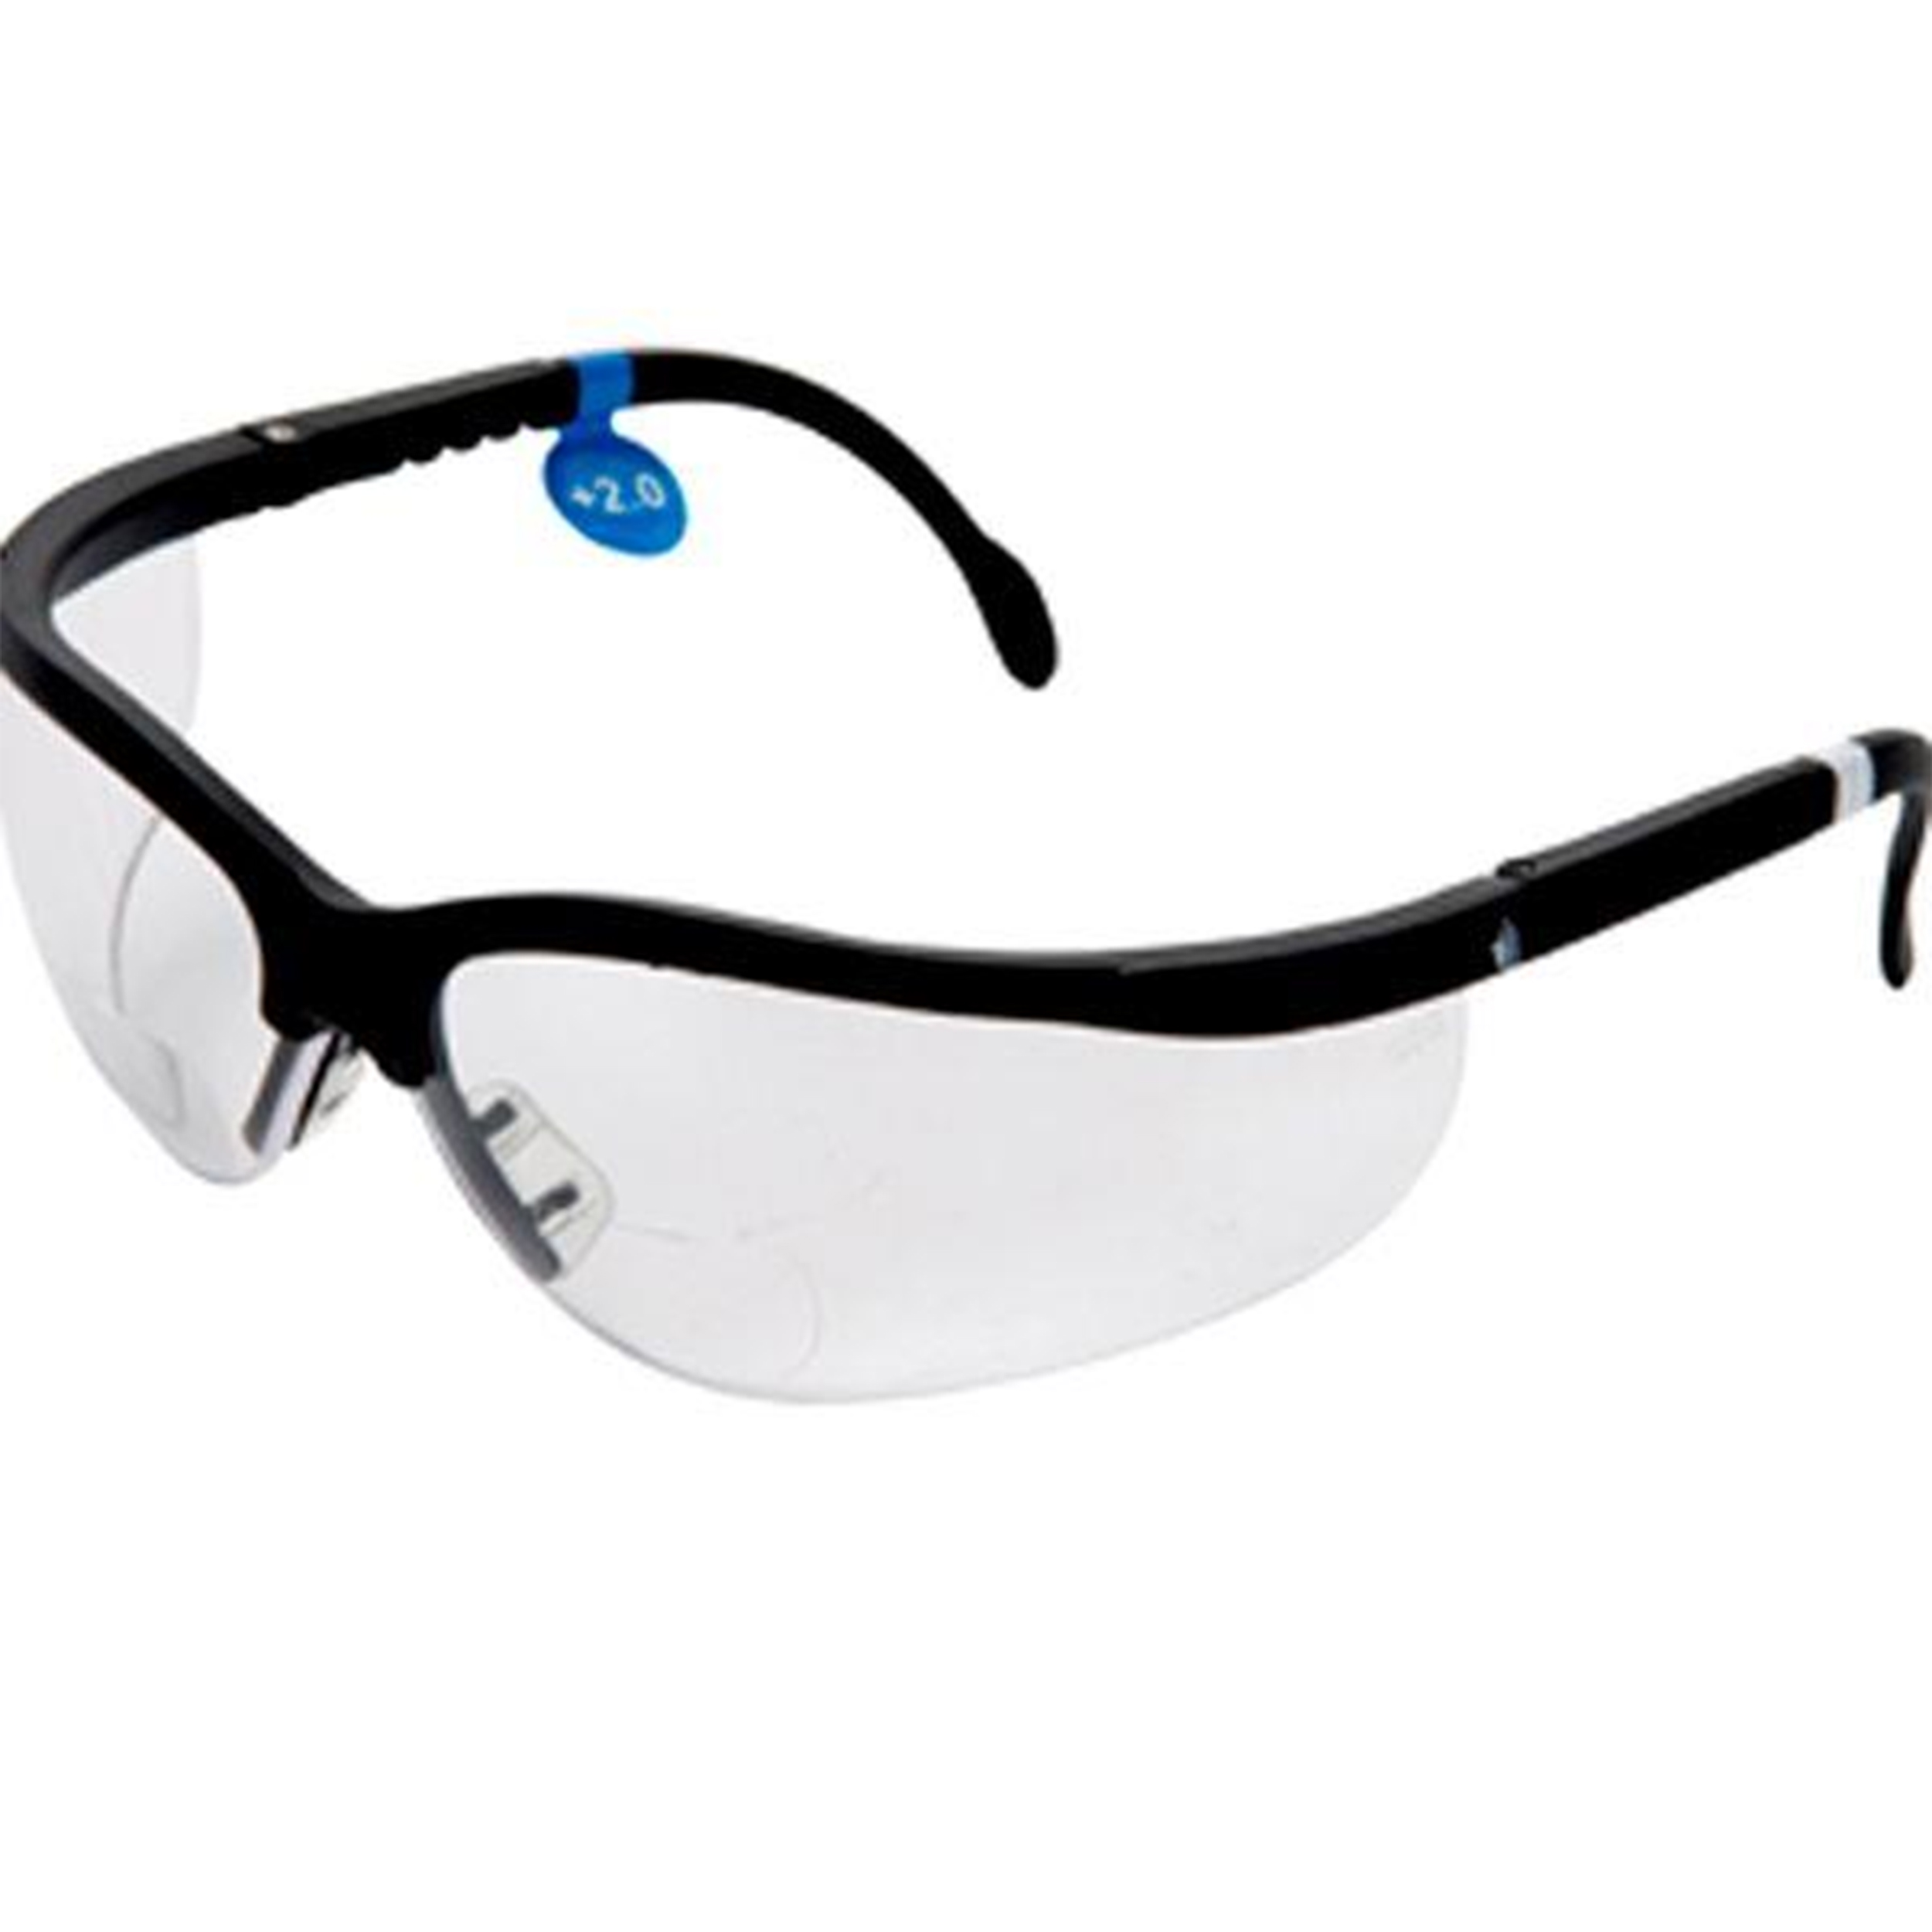 Magnifying Bifocal Safety Glasses 2.0 Diopter